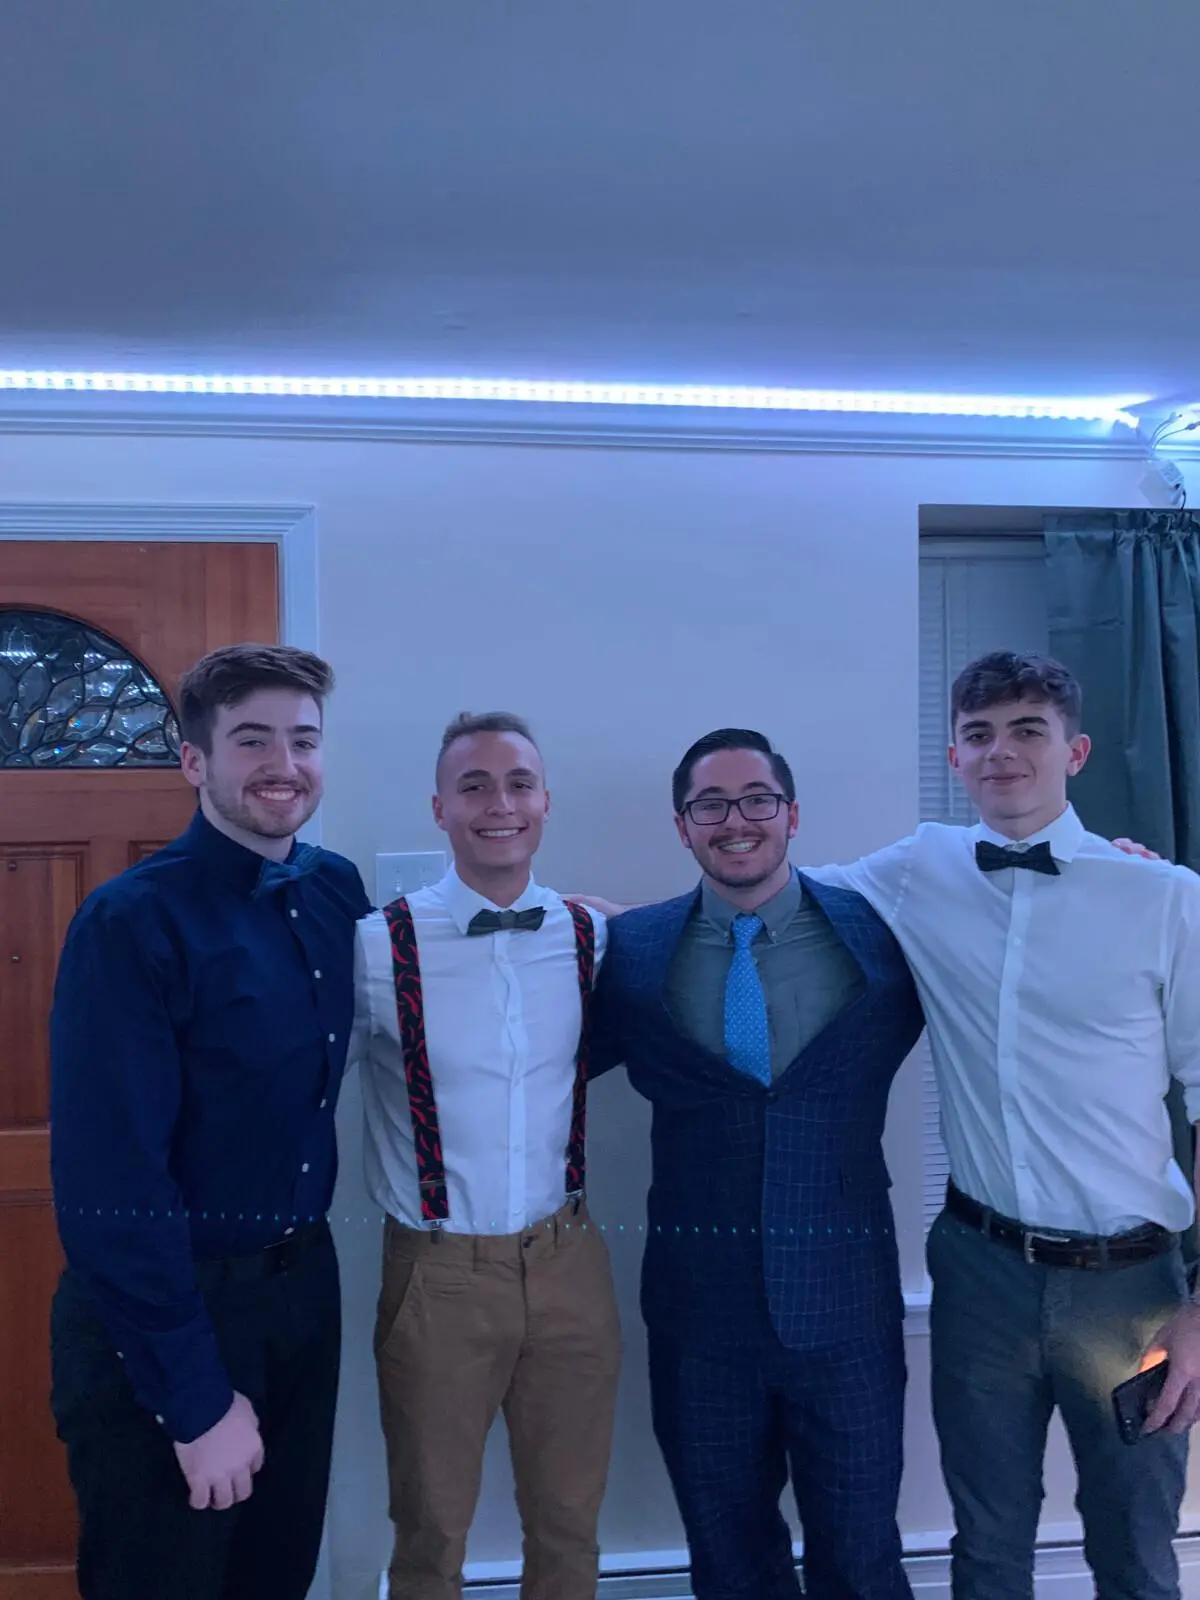 Patrick Ensmenger '23 in dress clothes with his arms around three friends, also dressed up